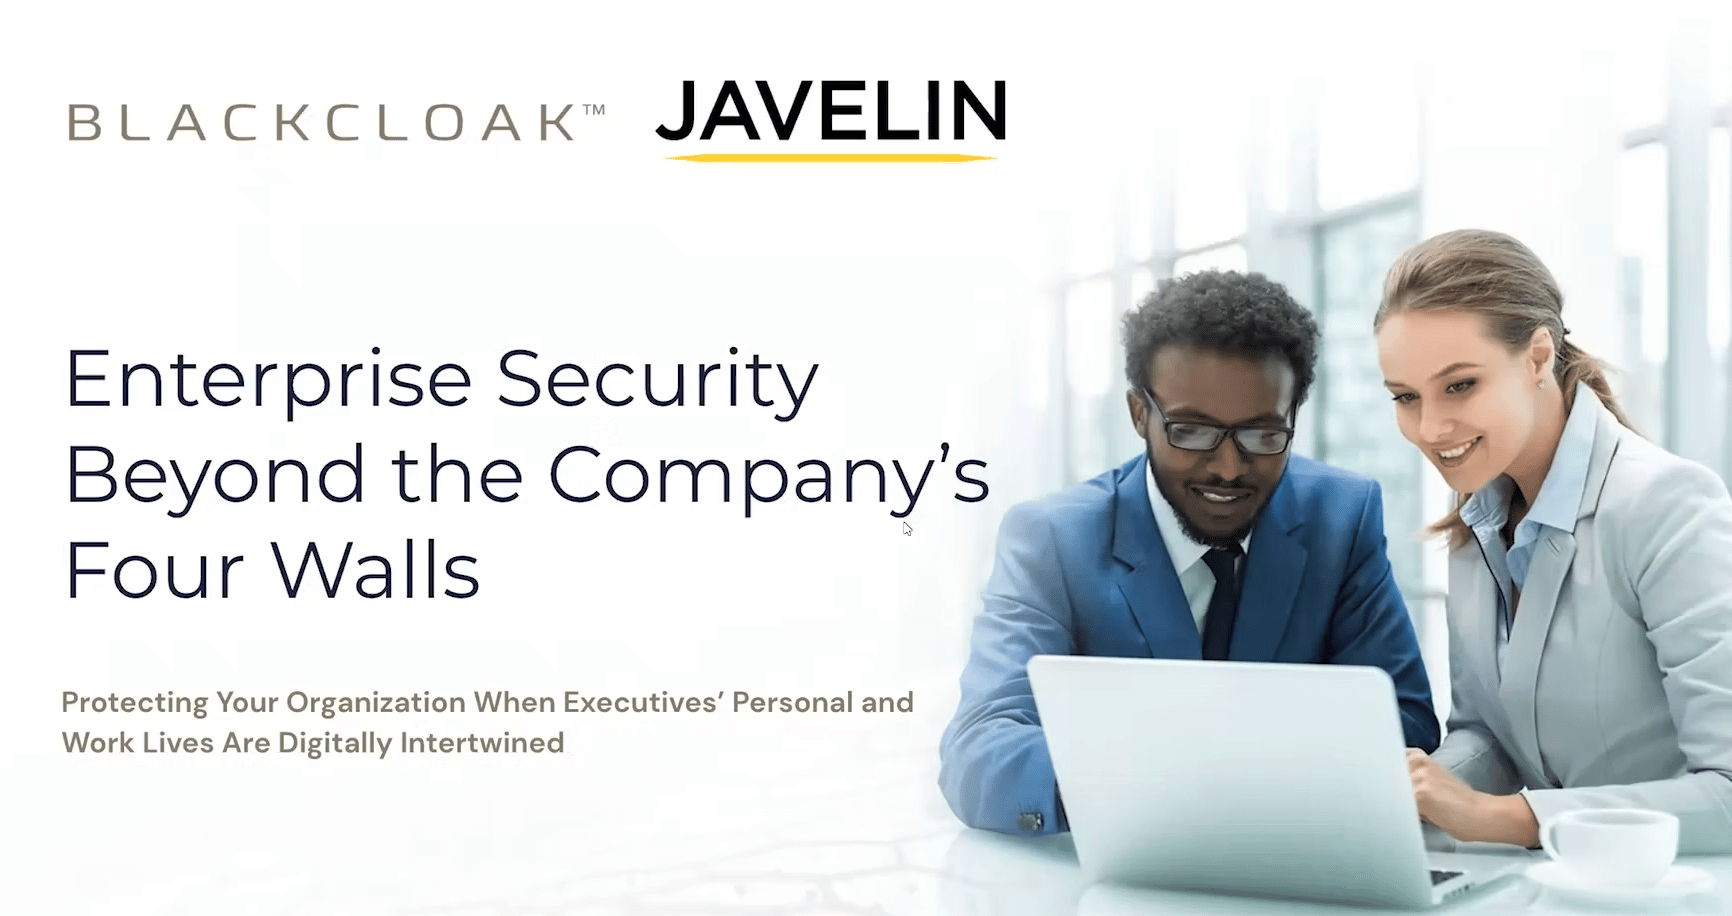 Enterprise Security Beyond the Company’s Four Walls